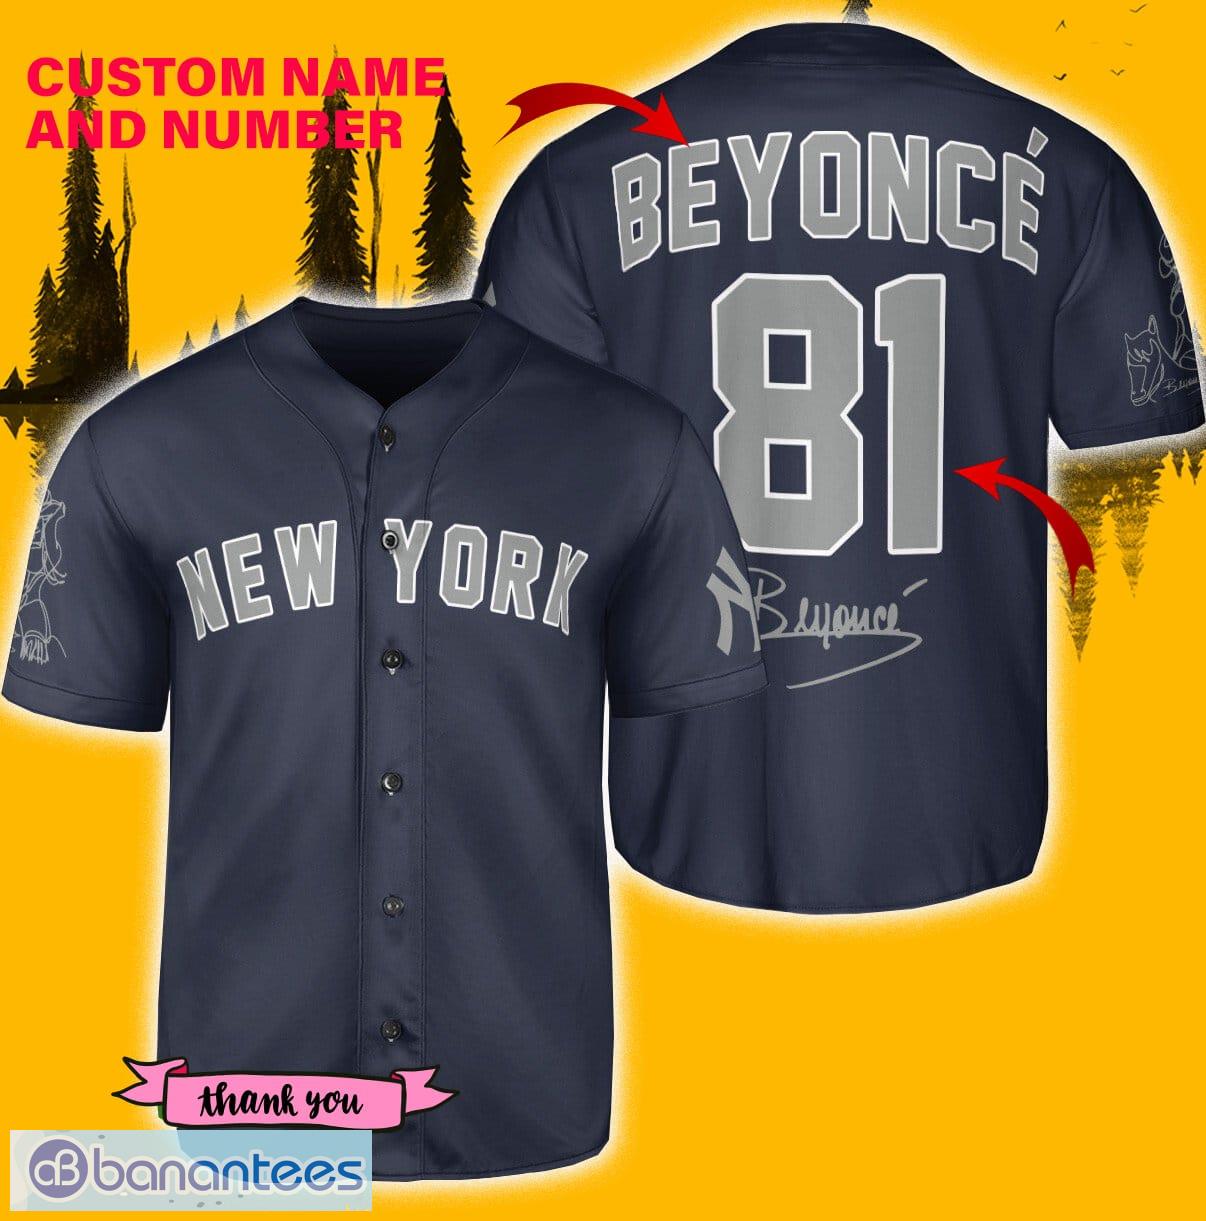 Get Your White New York Yankees Beyonce Baseball Jersey Now! - Scesy